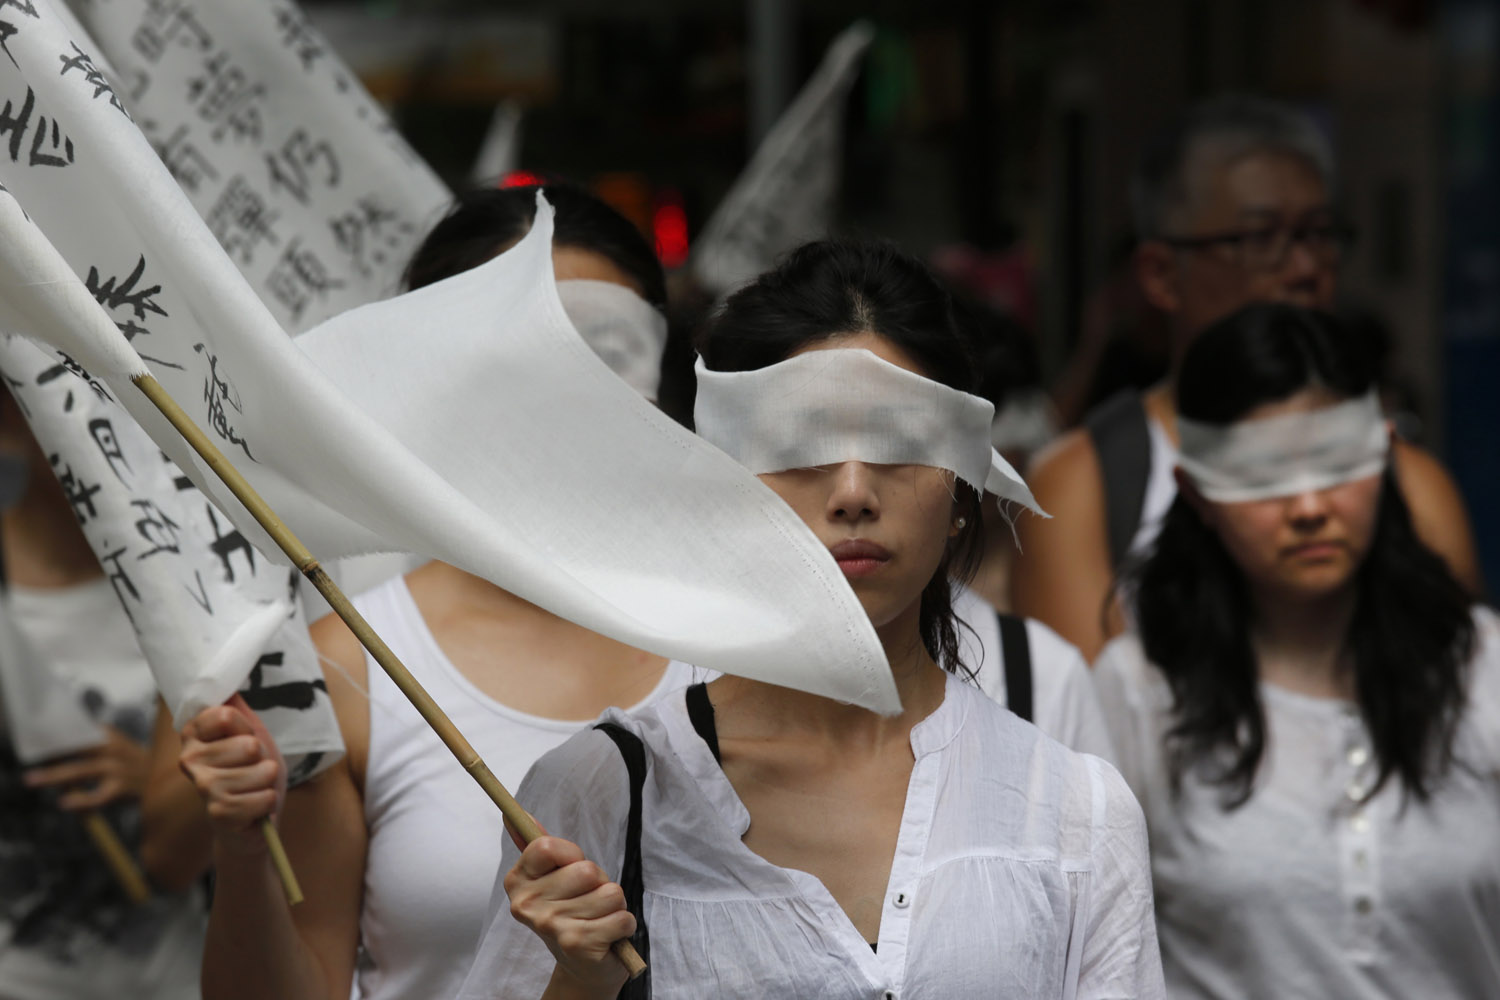 June 10, 2012. Protesters wear white dresses and cover eyes with white clothes to mourn for the death of Chinese labor activist Li Wangyang during a protest march in Hong Kong.